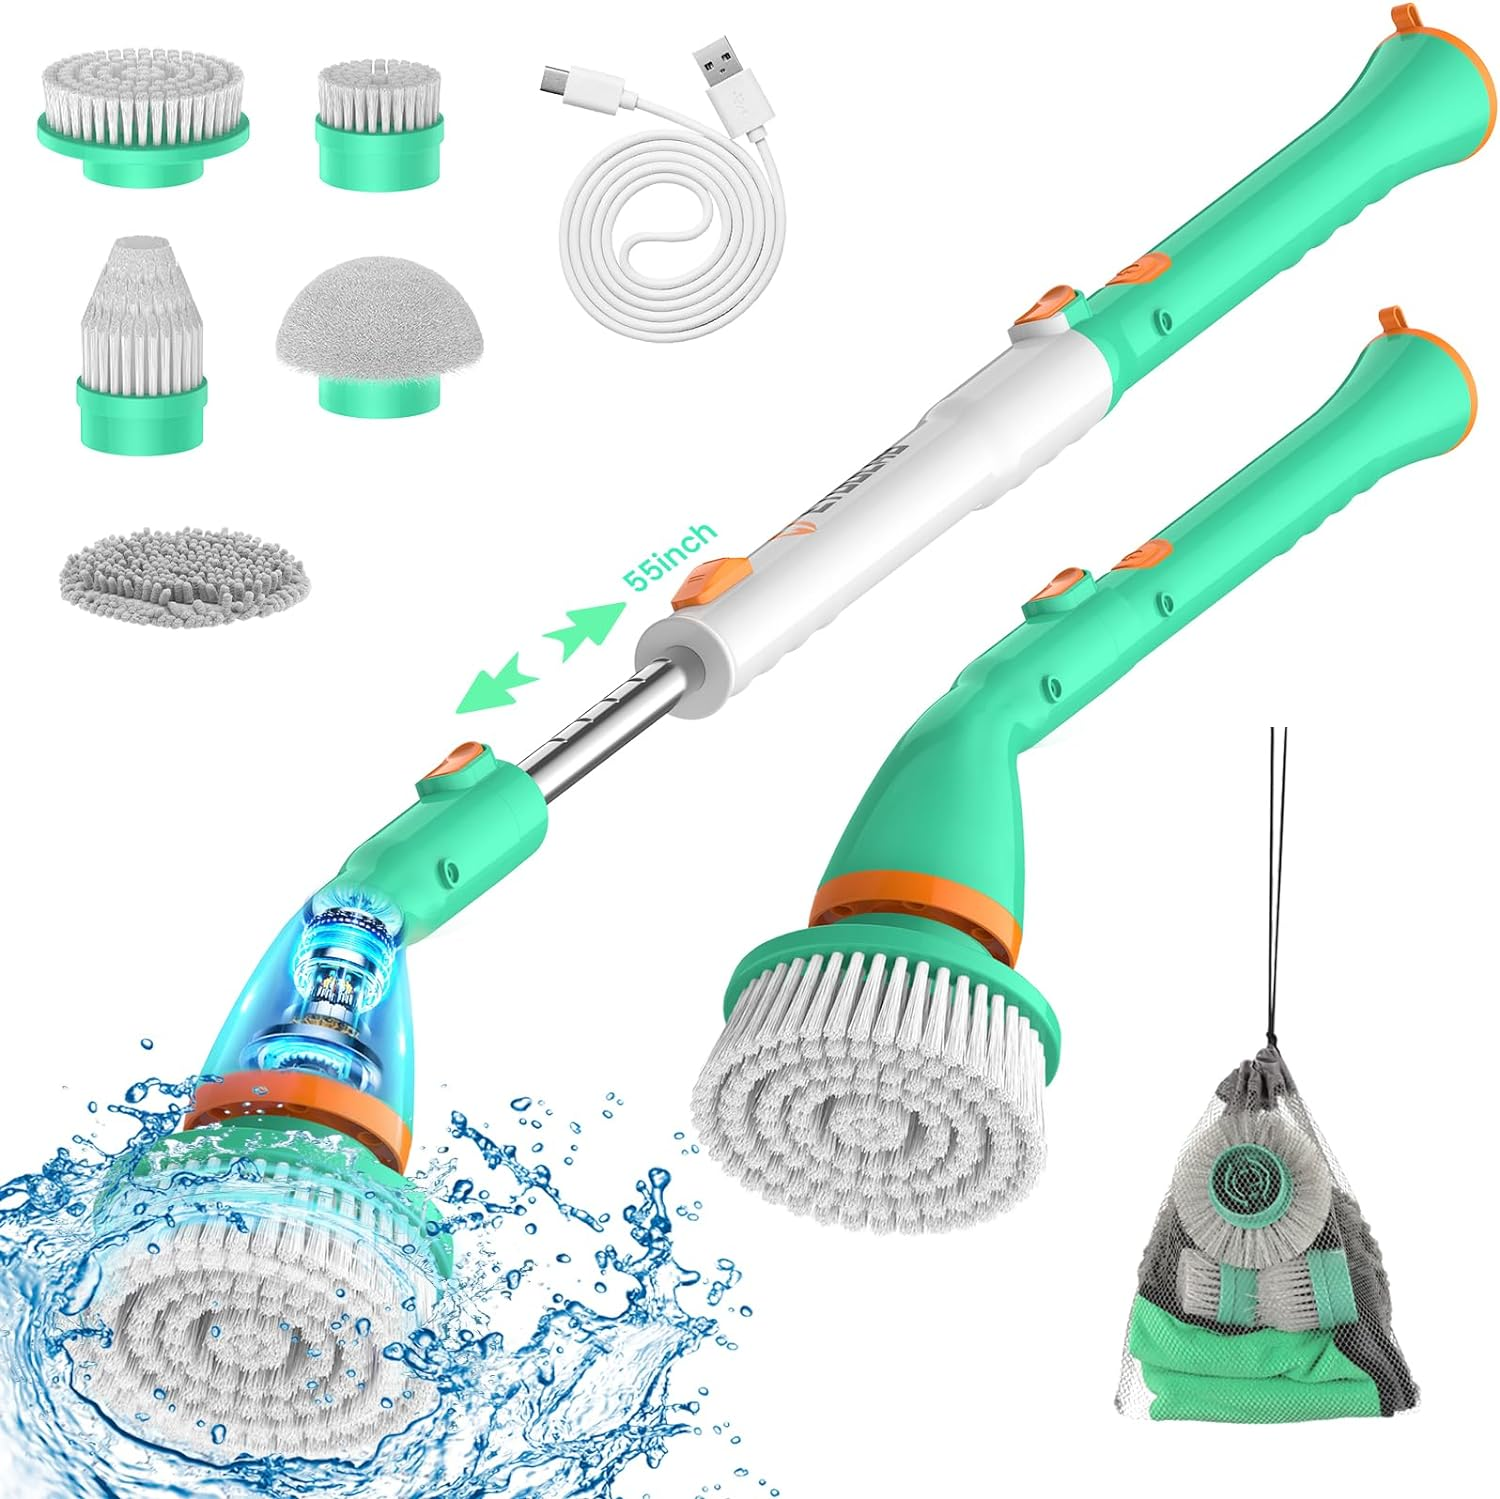 Electric Spin Scrubber, Power Scrubber Cordless High Rotation